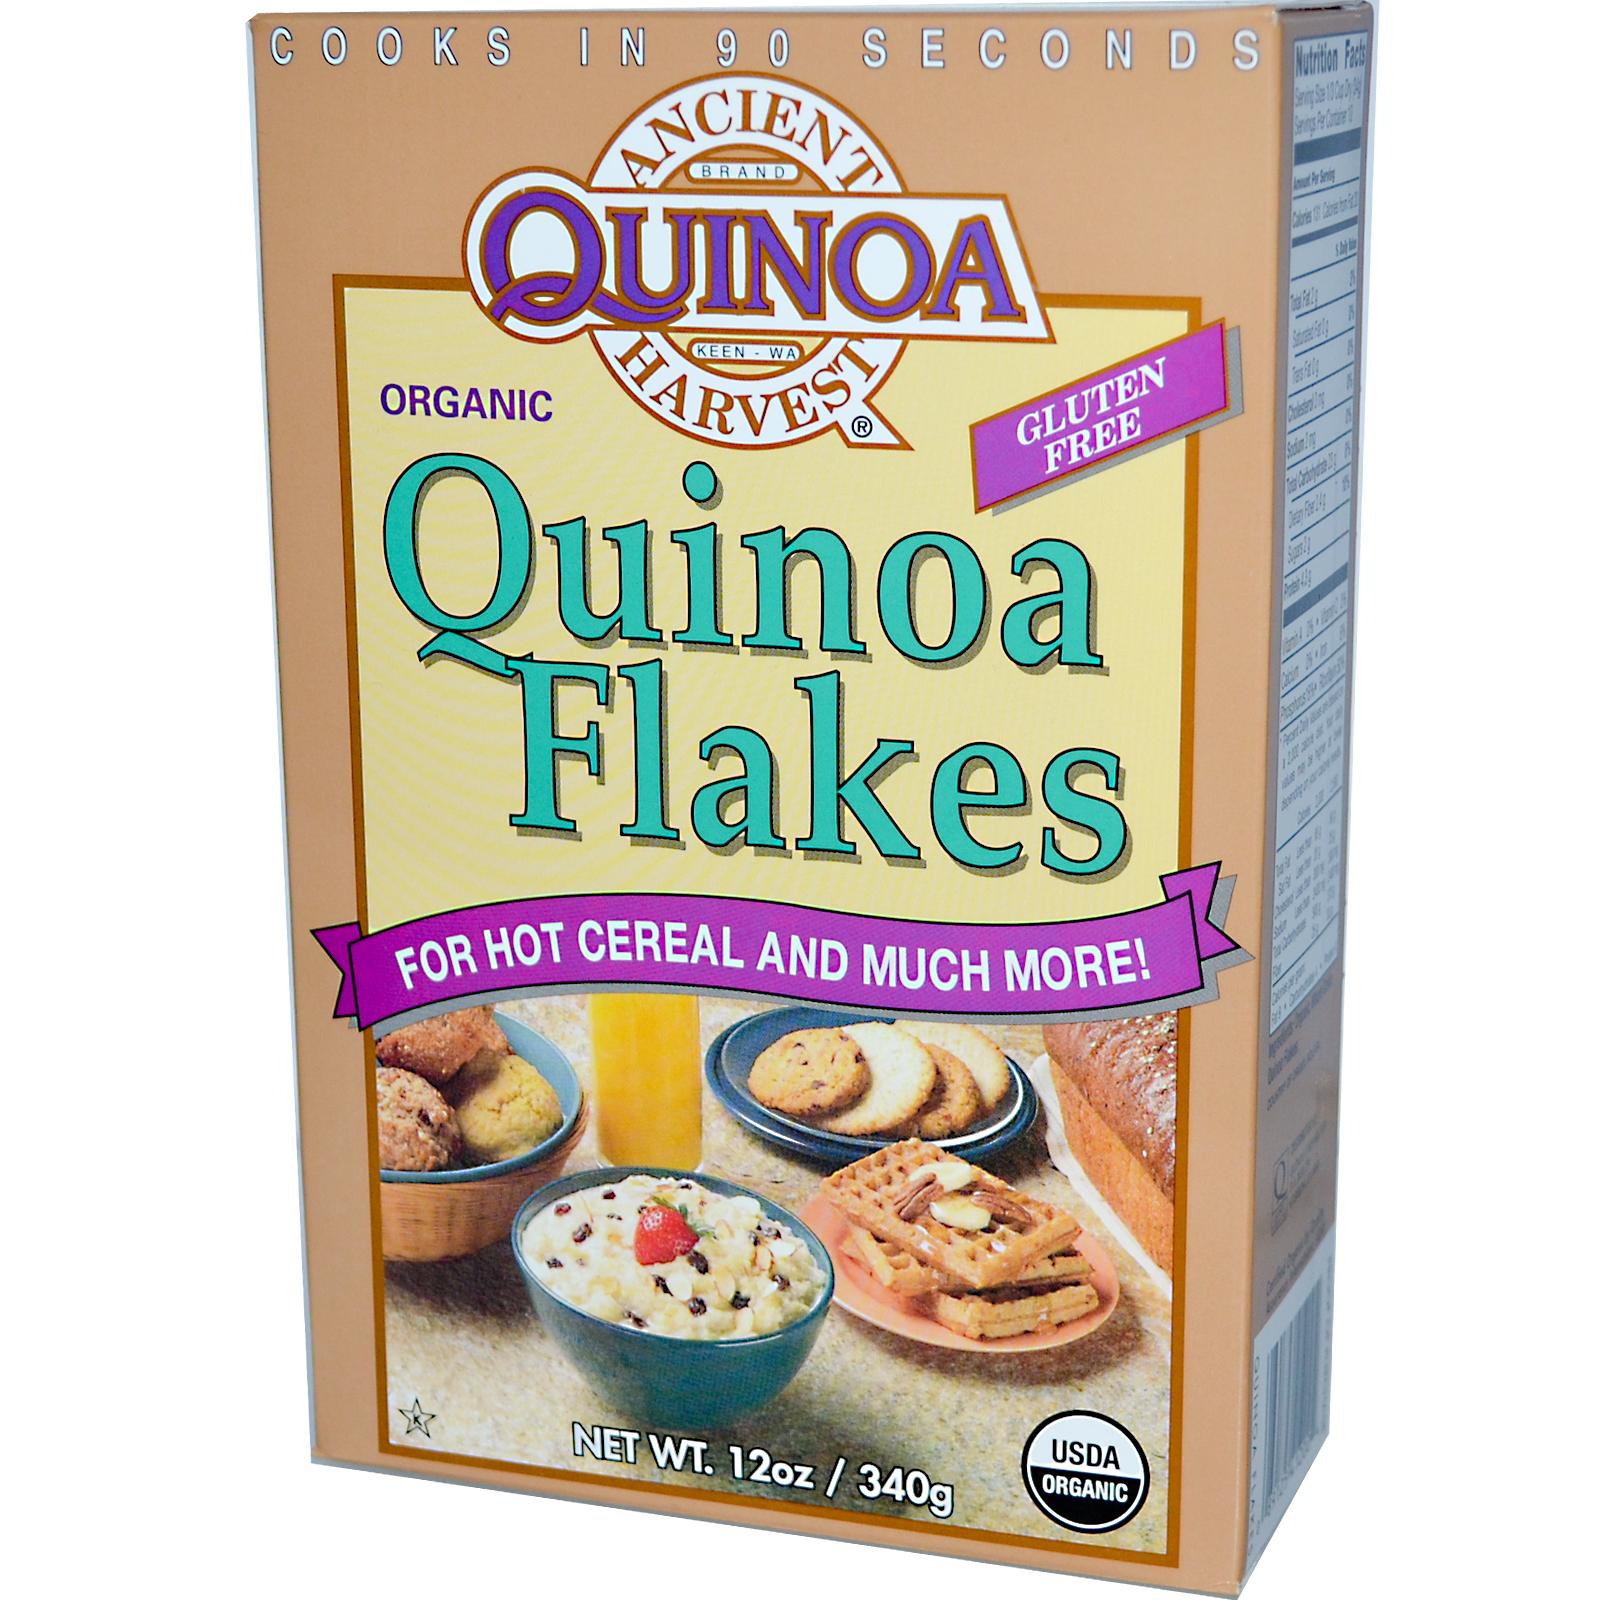 QUINOA CHALLENGE - WHOLE FLAVOR - WHOLEMAGIC: Quinoa Challenge is a Smell Test. It requires preparing a small serving of hot, Quinoa Porridge using Ancient Harvest Quinoa Flakes, and smelling the Quinoa Porridge while it is steaming hot. The Winner has to correctly name the Primary Odor generated by Quinoa.